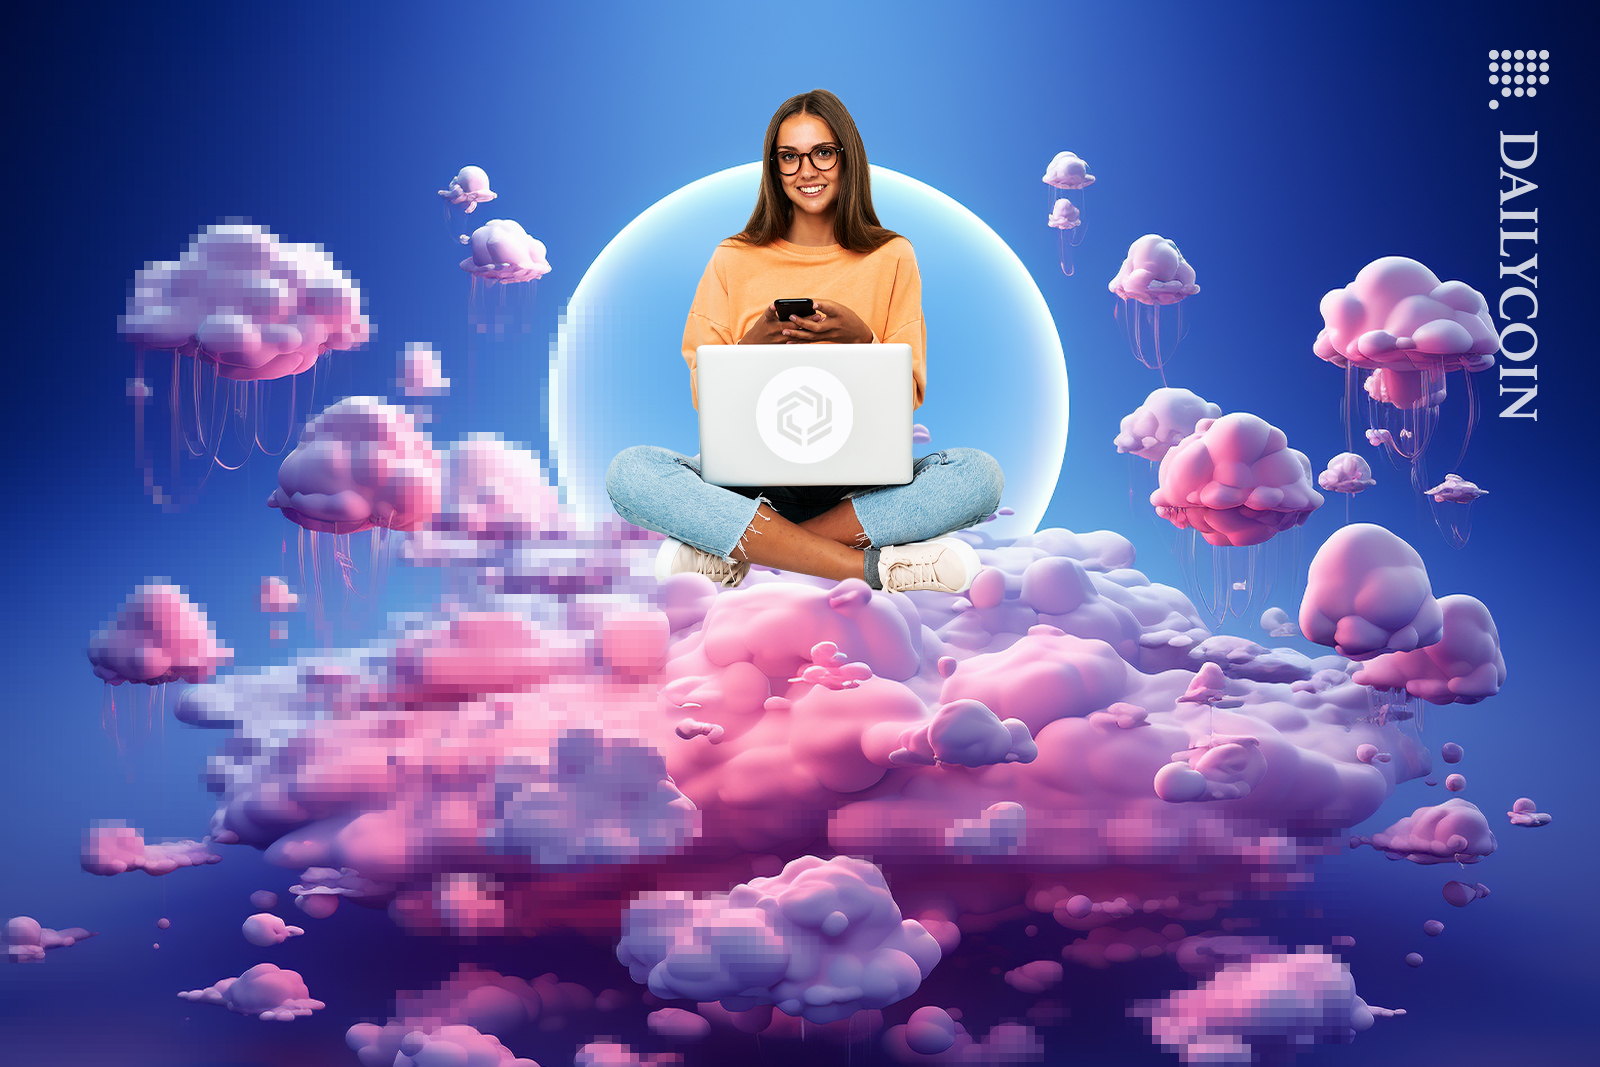 Girl on clouds playing blockchain games.